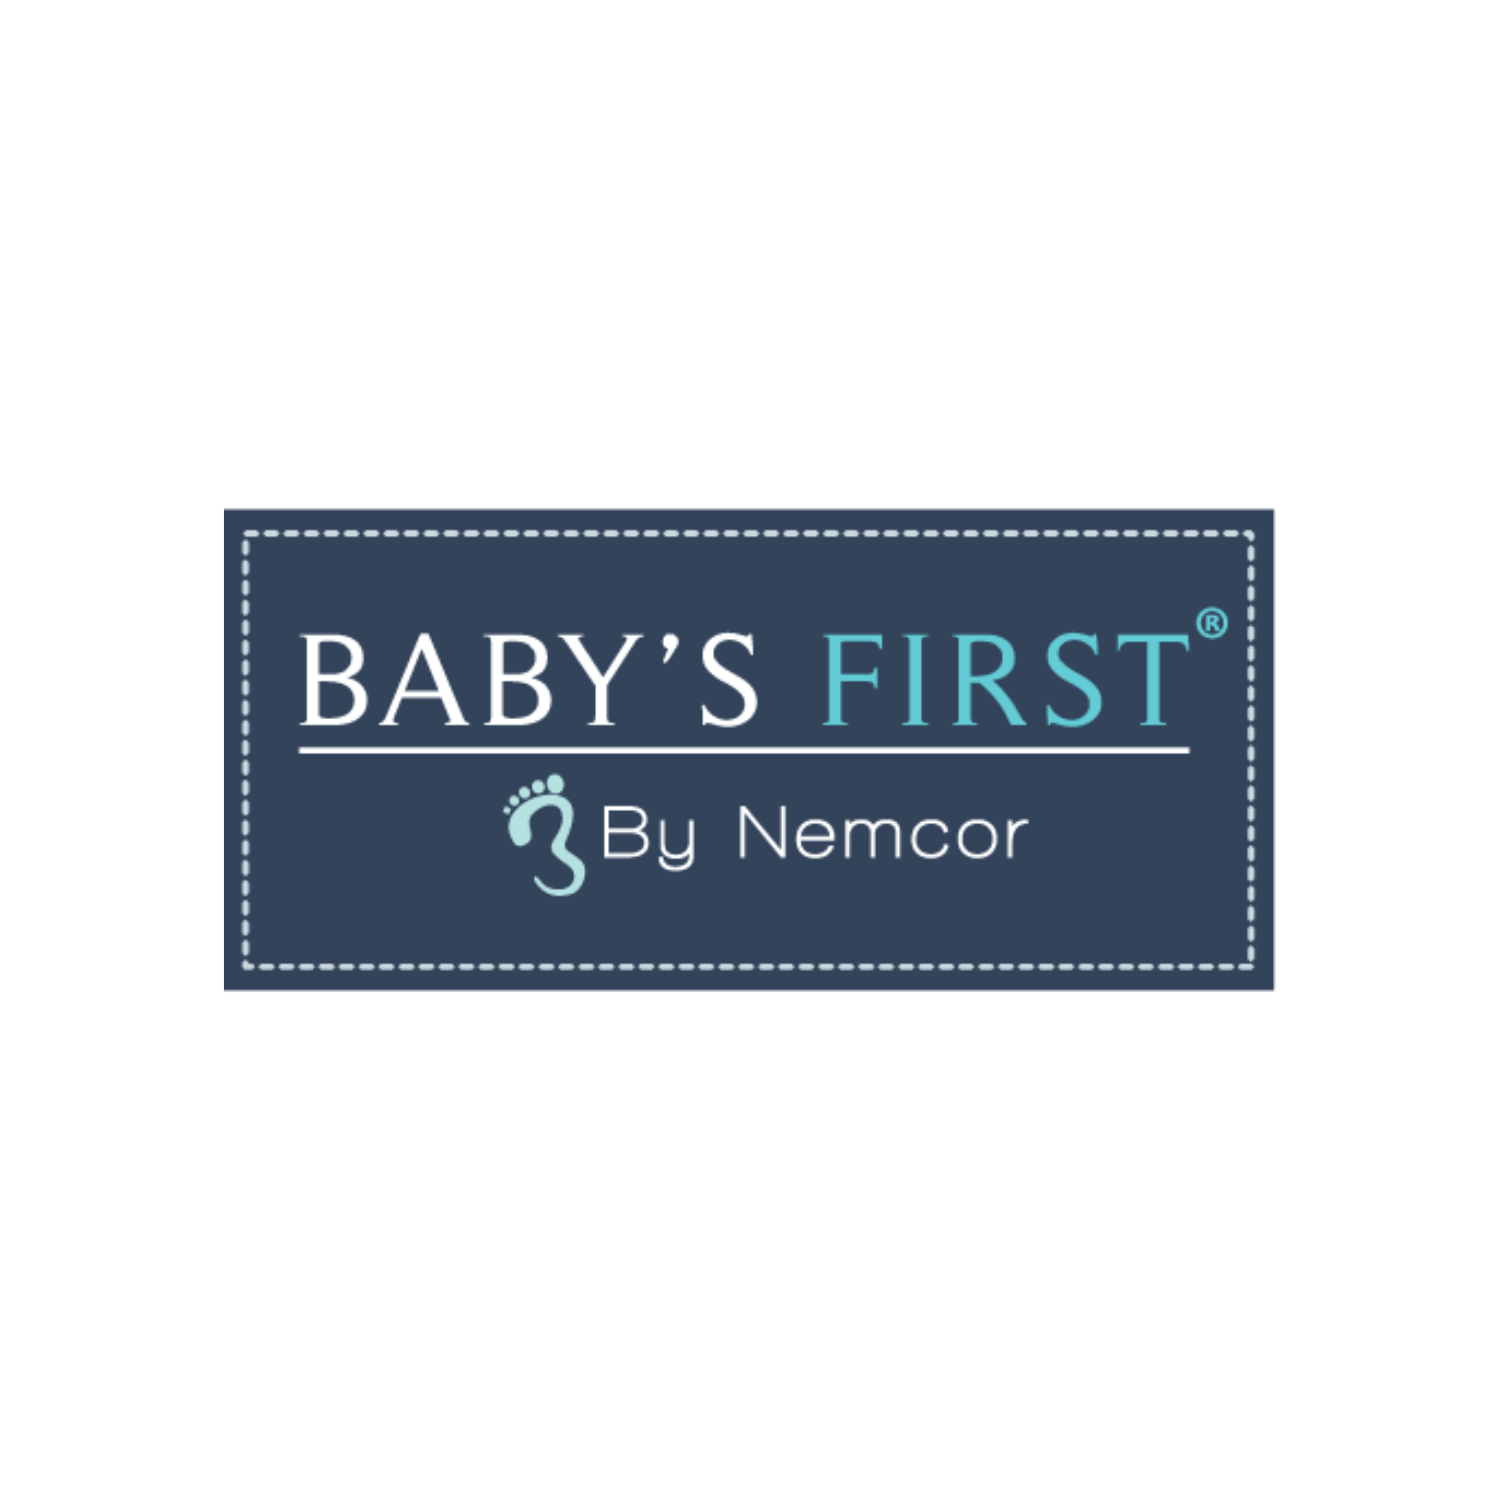 Shop Baby's First by Nemcor products